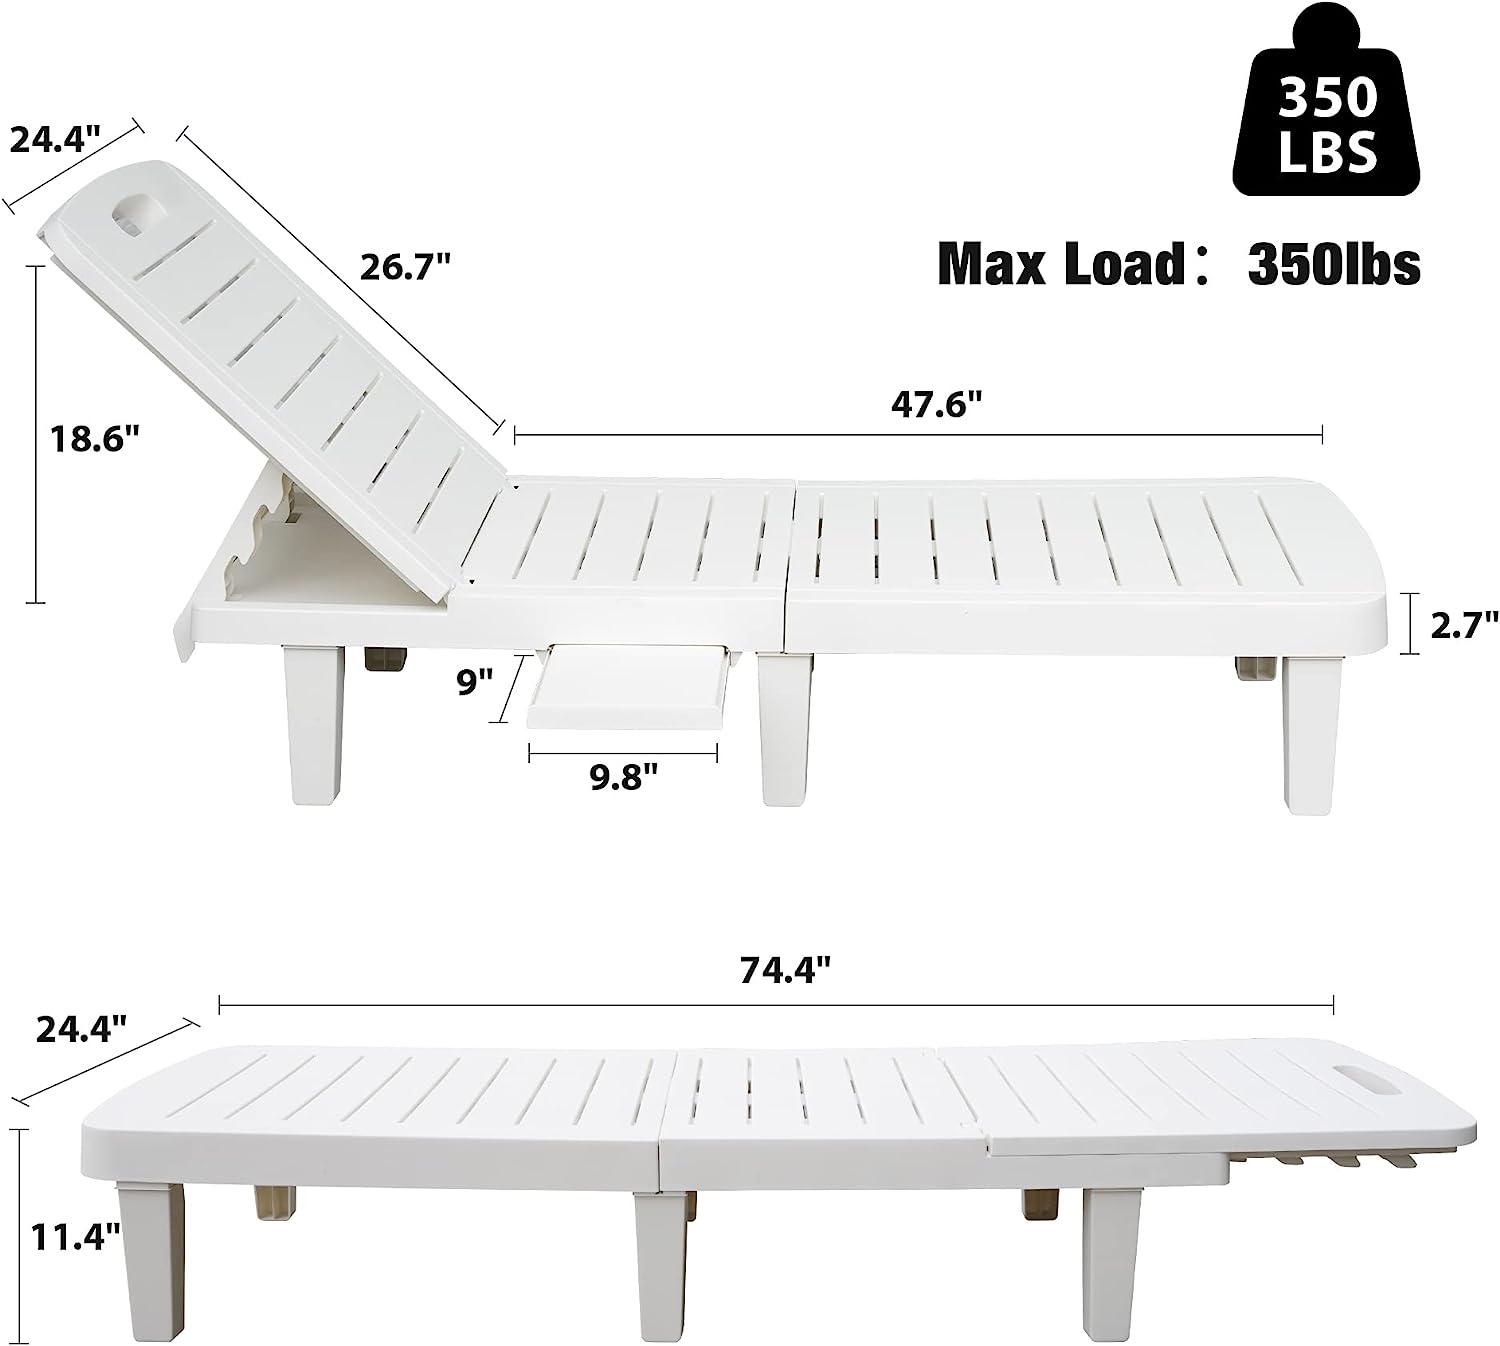 Chaise Lounge Chair Patio Polypropylene Sunbathing Chair with 4 Level Adjustable Backrest & Hide Cup Holder, White